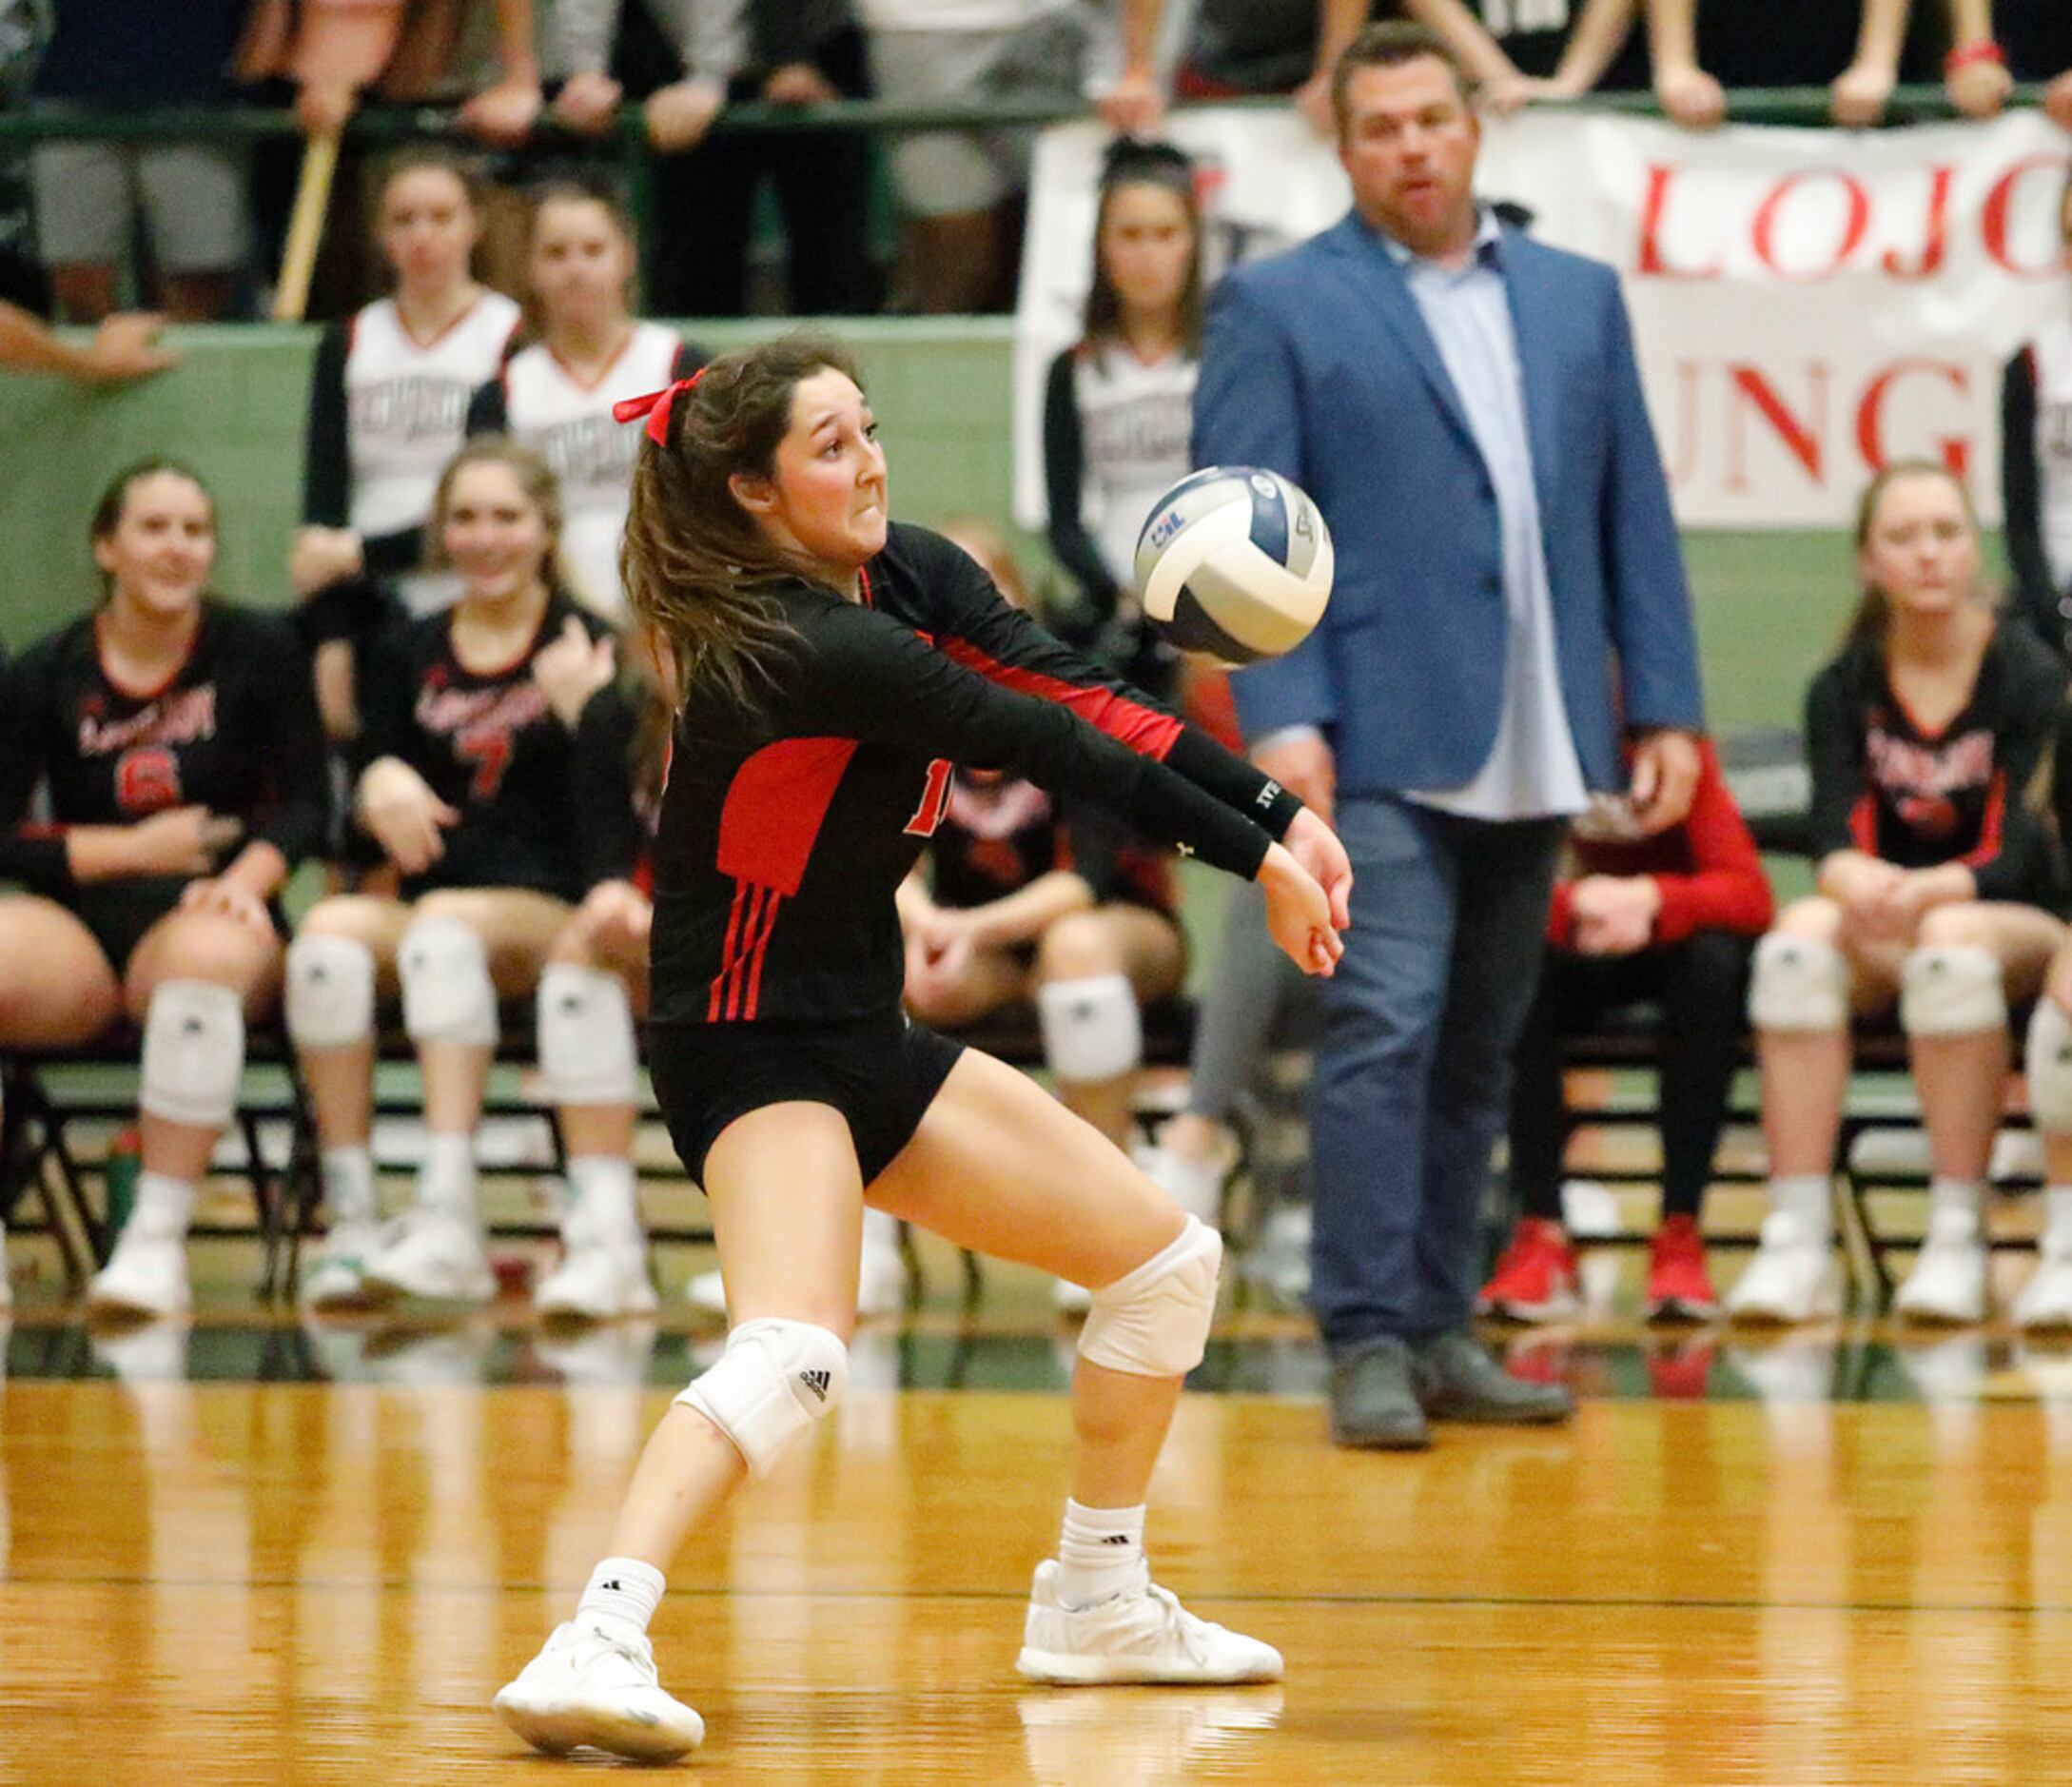 Lovejoy High School defensive specialist Emma Johnson (16) takes a serve in game three as...